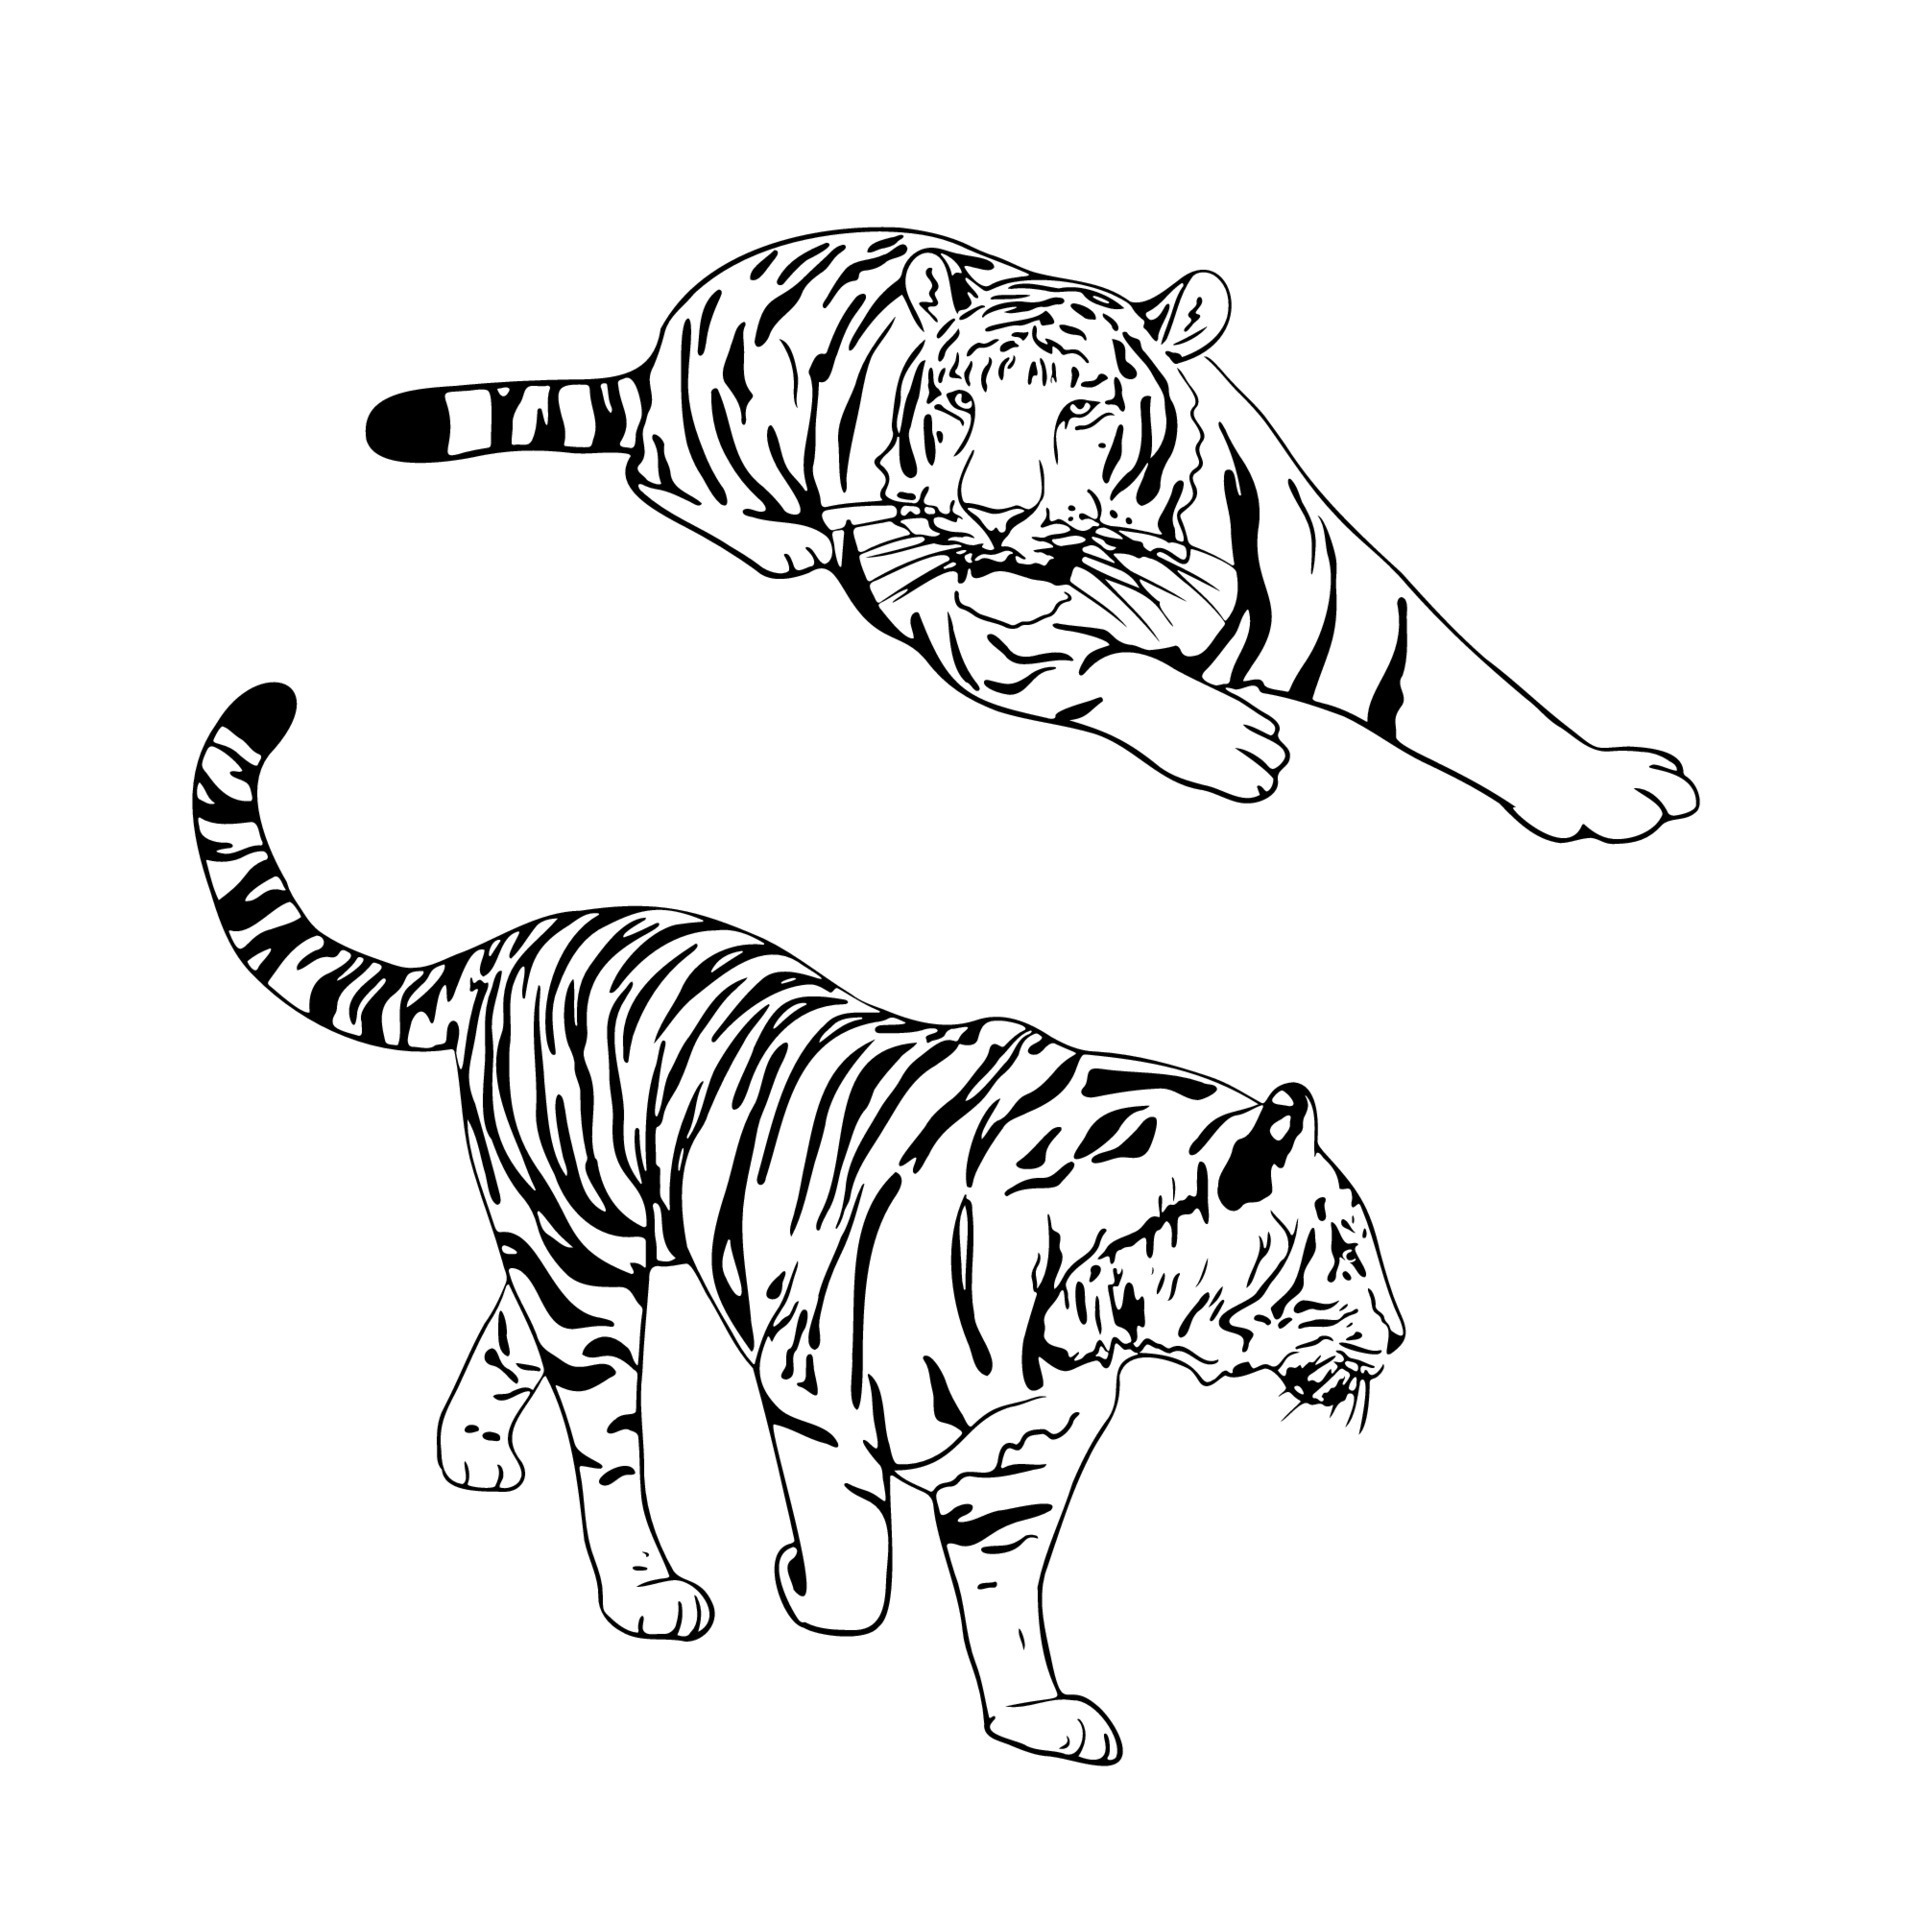 100000 Tiger drawing Vector Images  Depositphotos